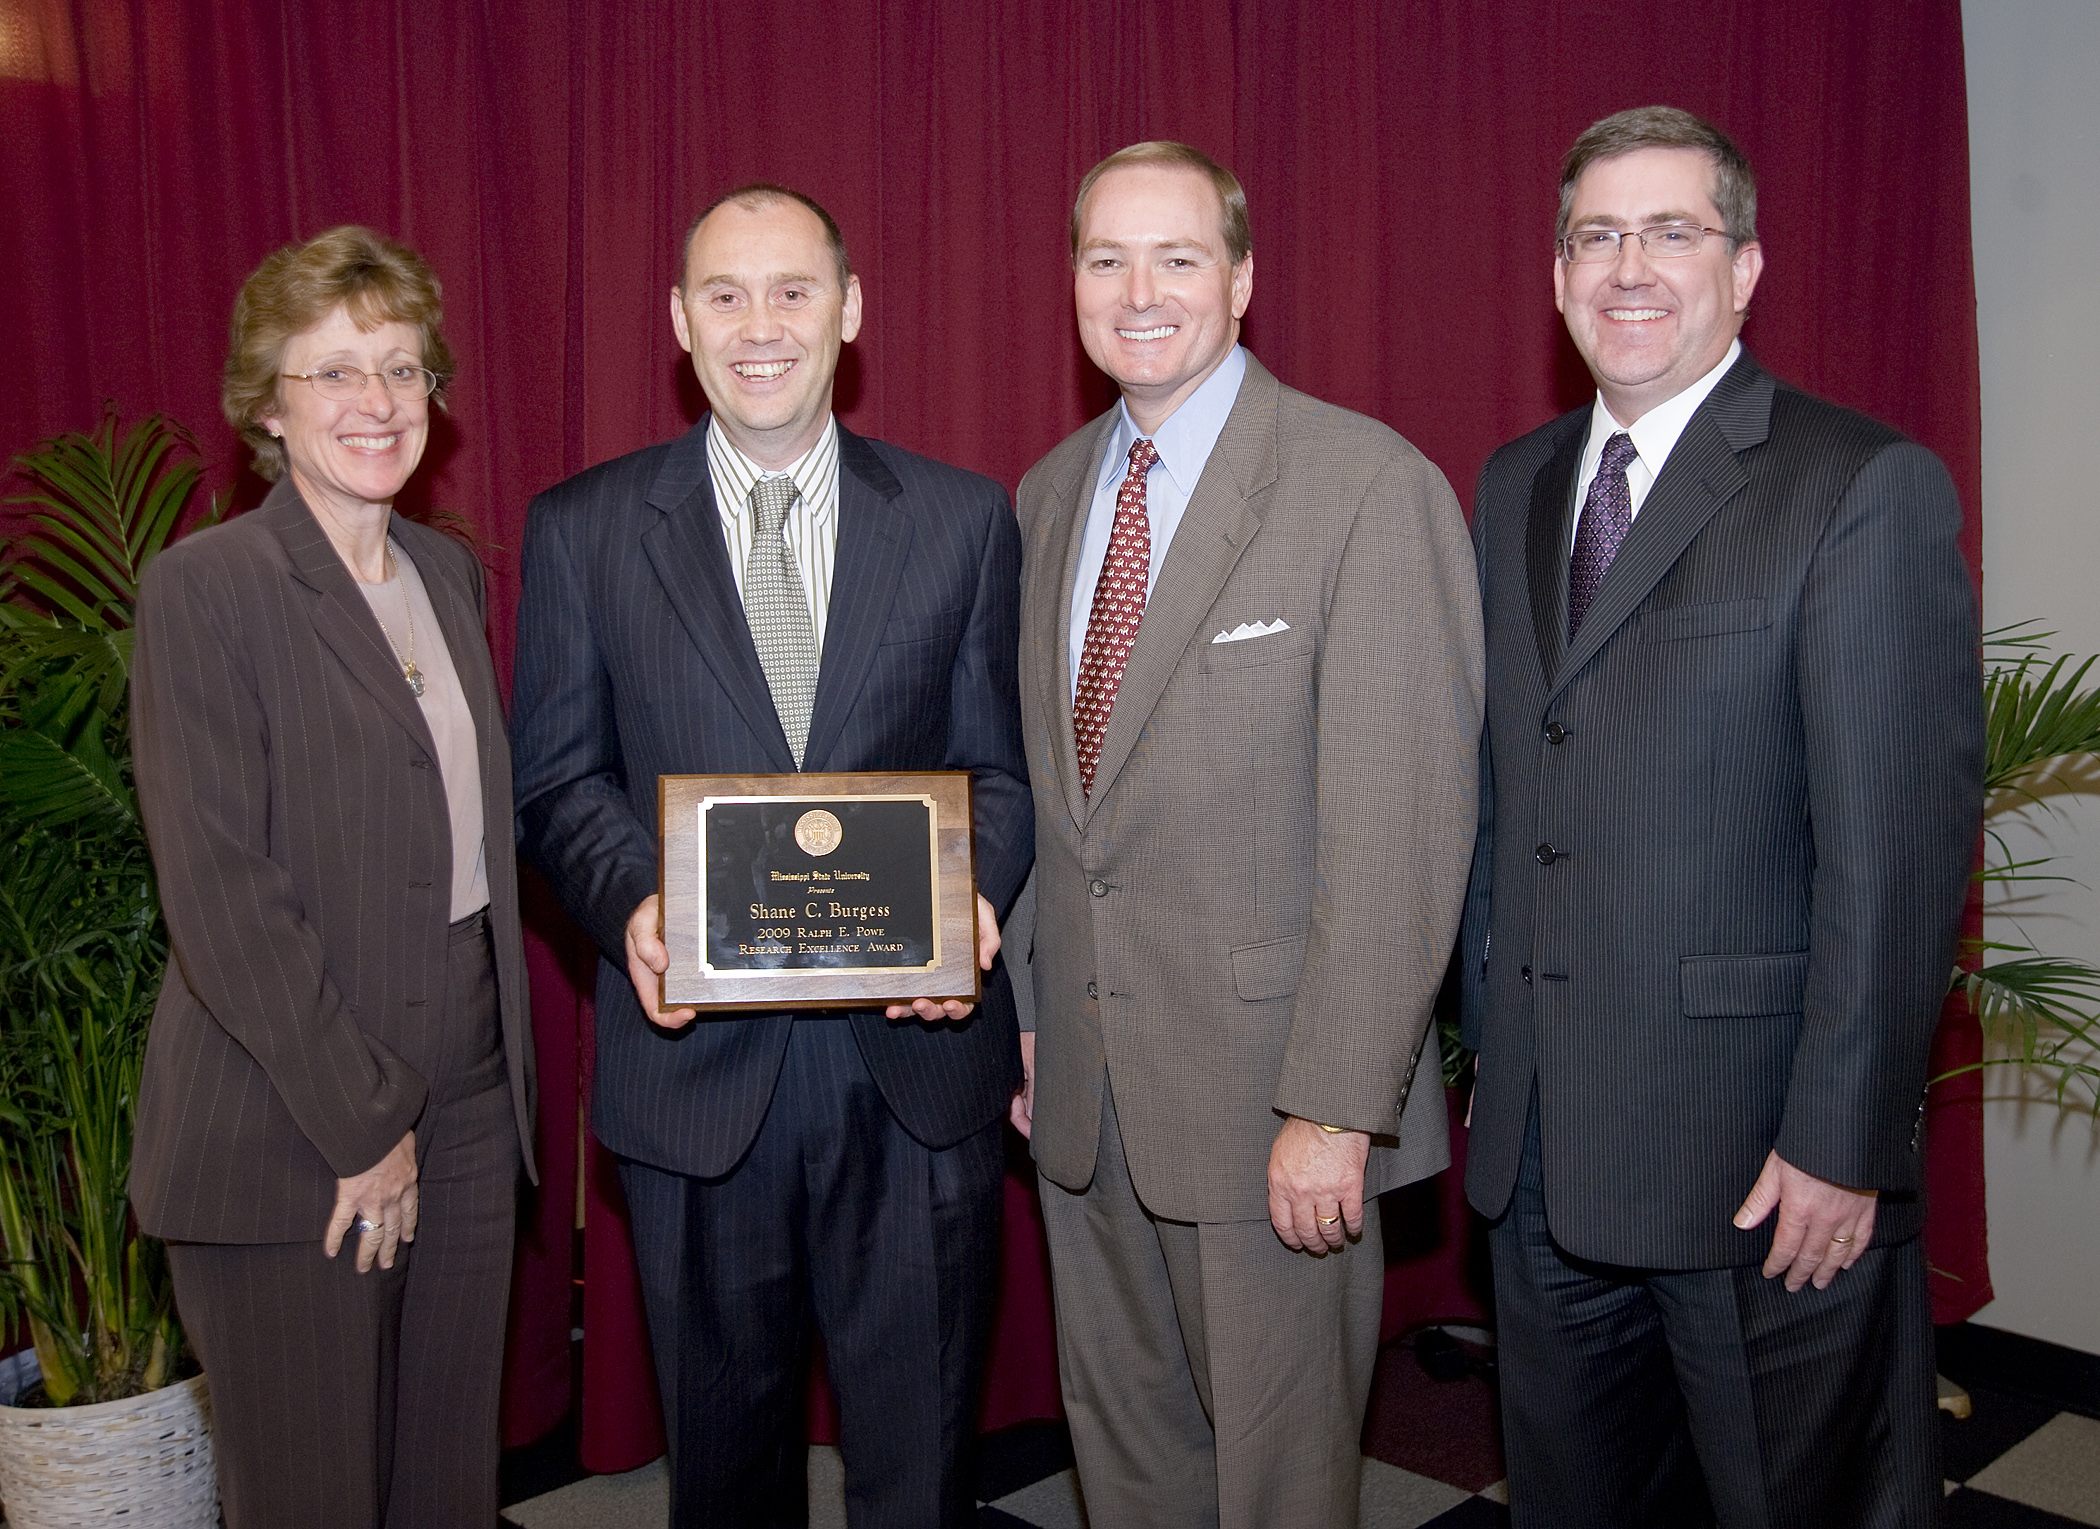 Mississippi State's 2009 Powe Award winner, Dr. Shane Burgess, second from left, is congratulated by Melissa Mixon, interim vice president of agriculture, forestry and veterinary medicine; President Mark Keenum; and Kirk Schulz, vice president of research and economic development.